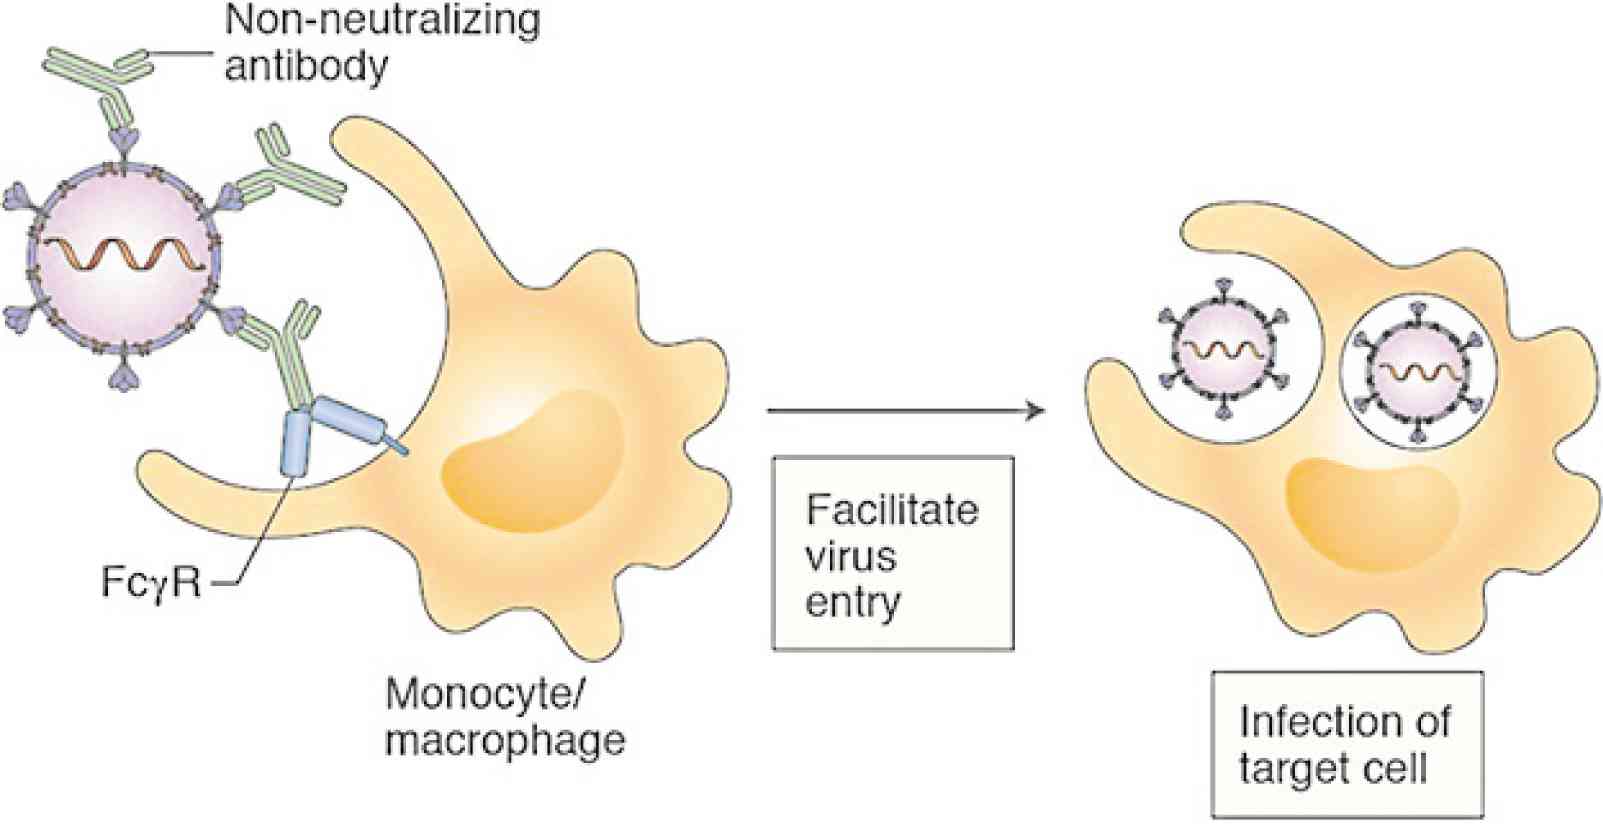 Nonneutralizing (ineffective) antibodies binding with the virus and facilitating its entry into immune system cells (monocyte, macrophage), setting the stage for an infection